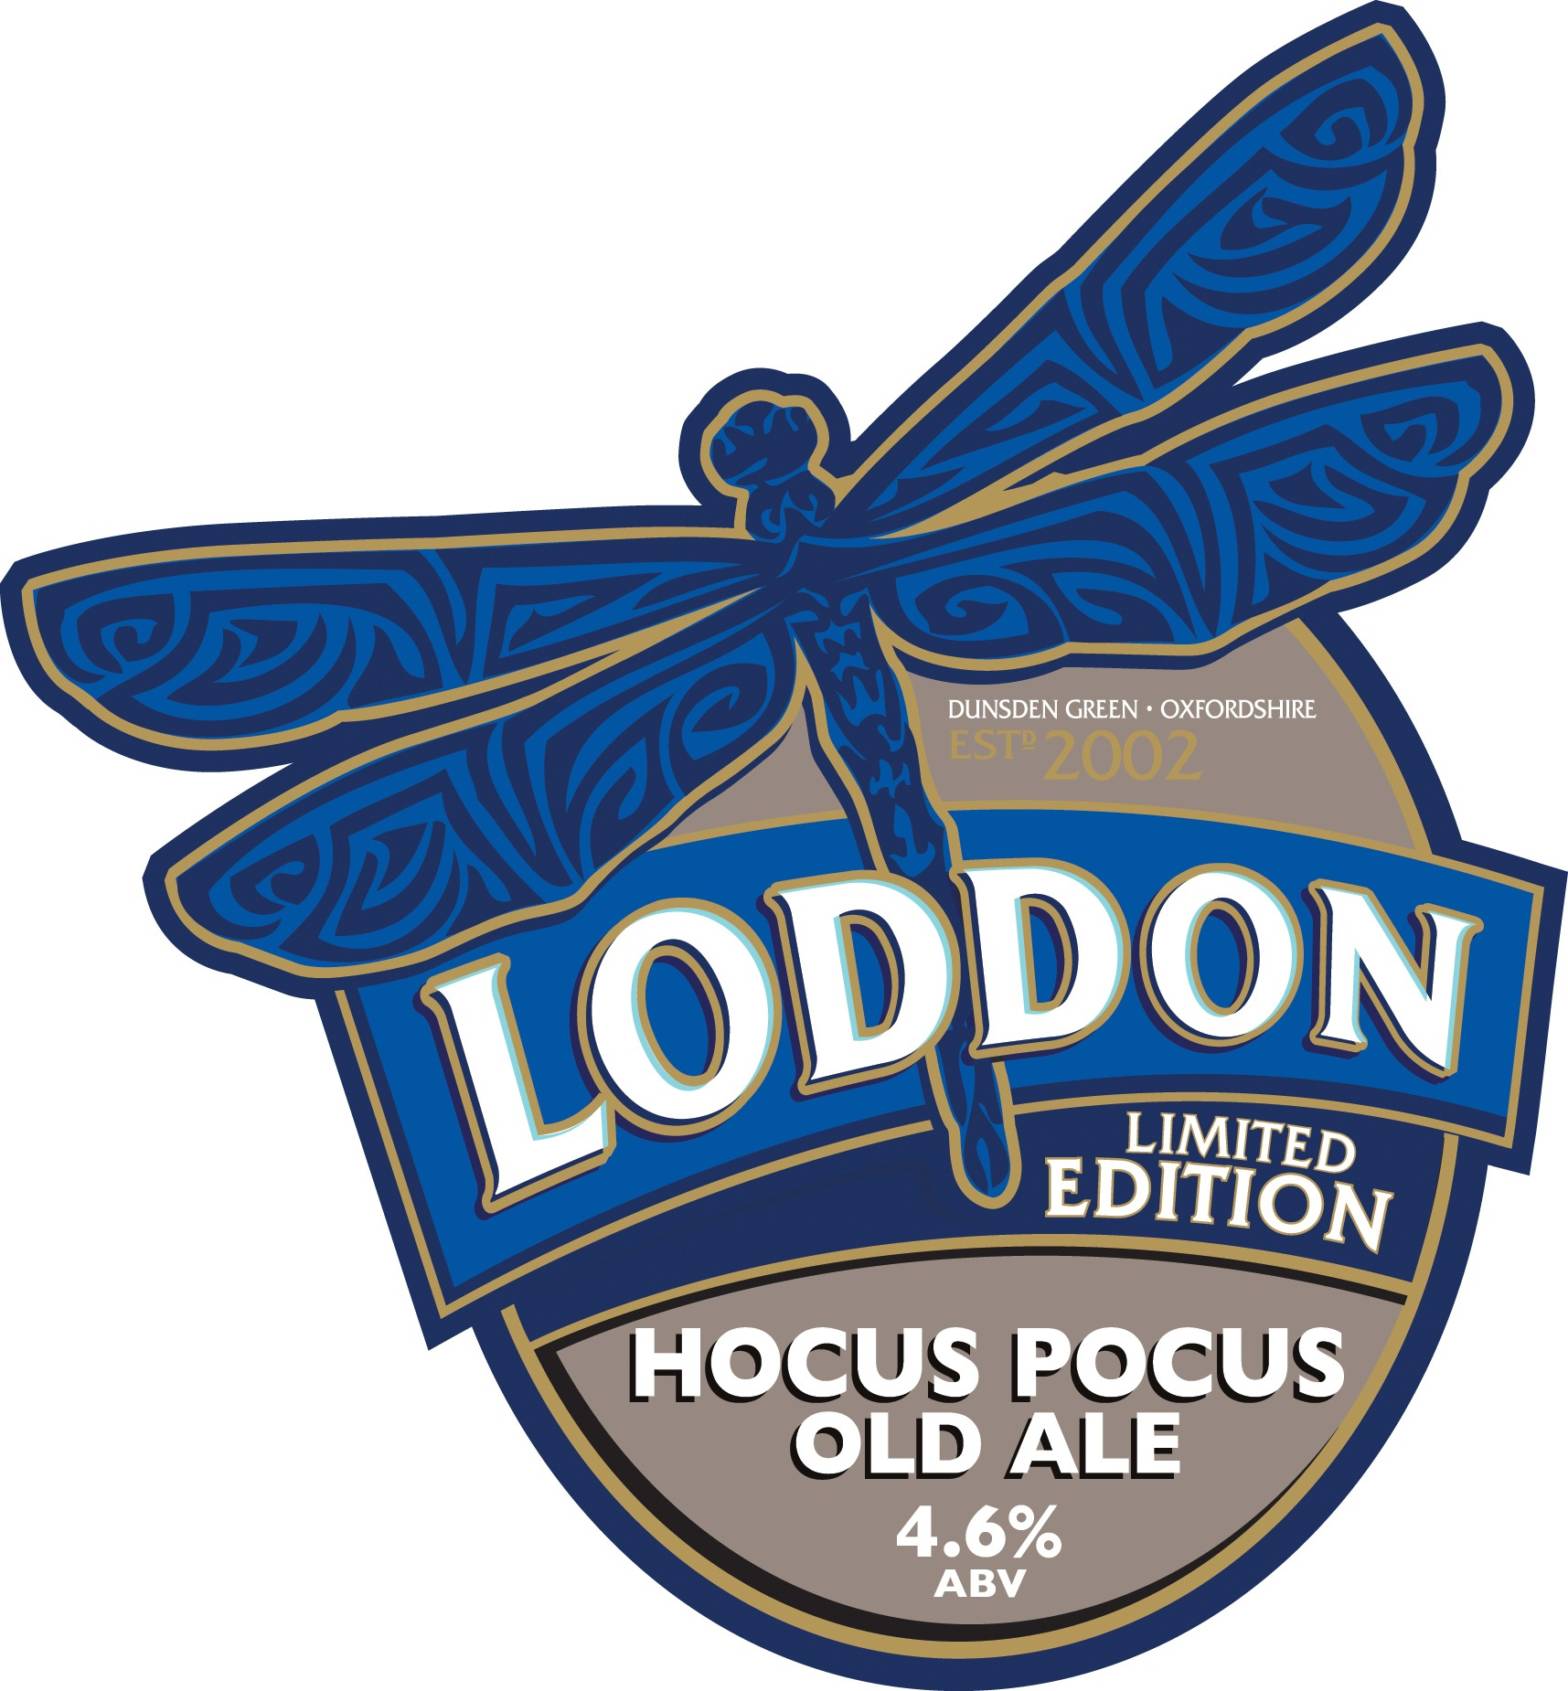 Loddon Brewery Limited Edition - Hocus Pocus Ale